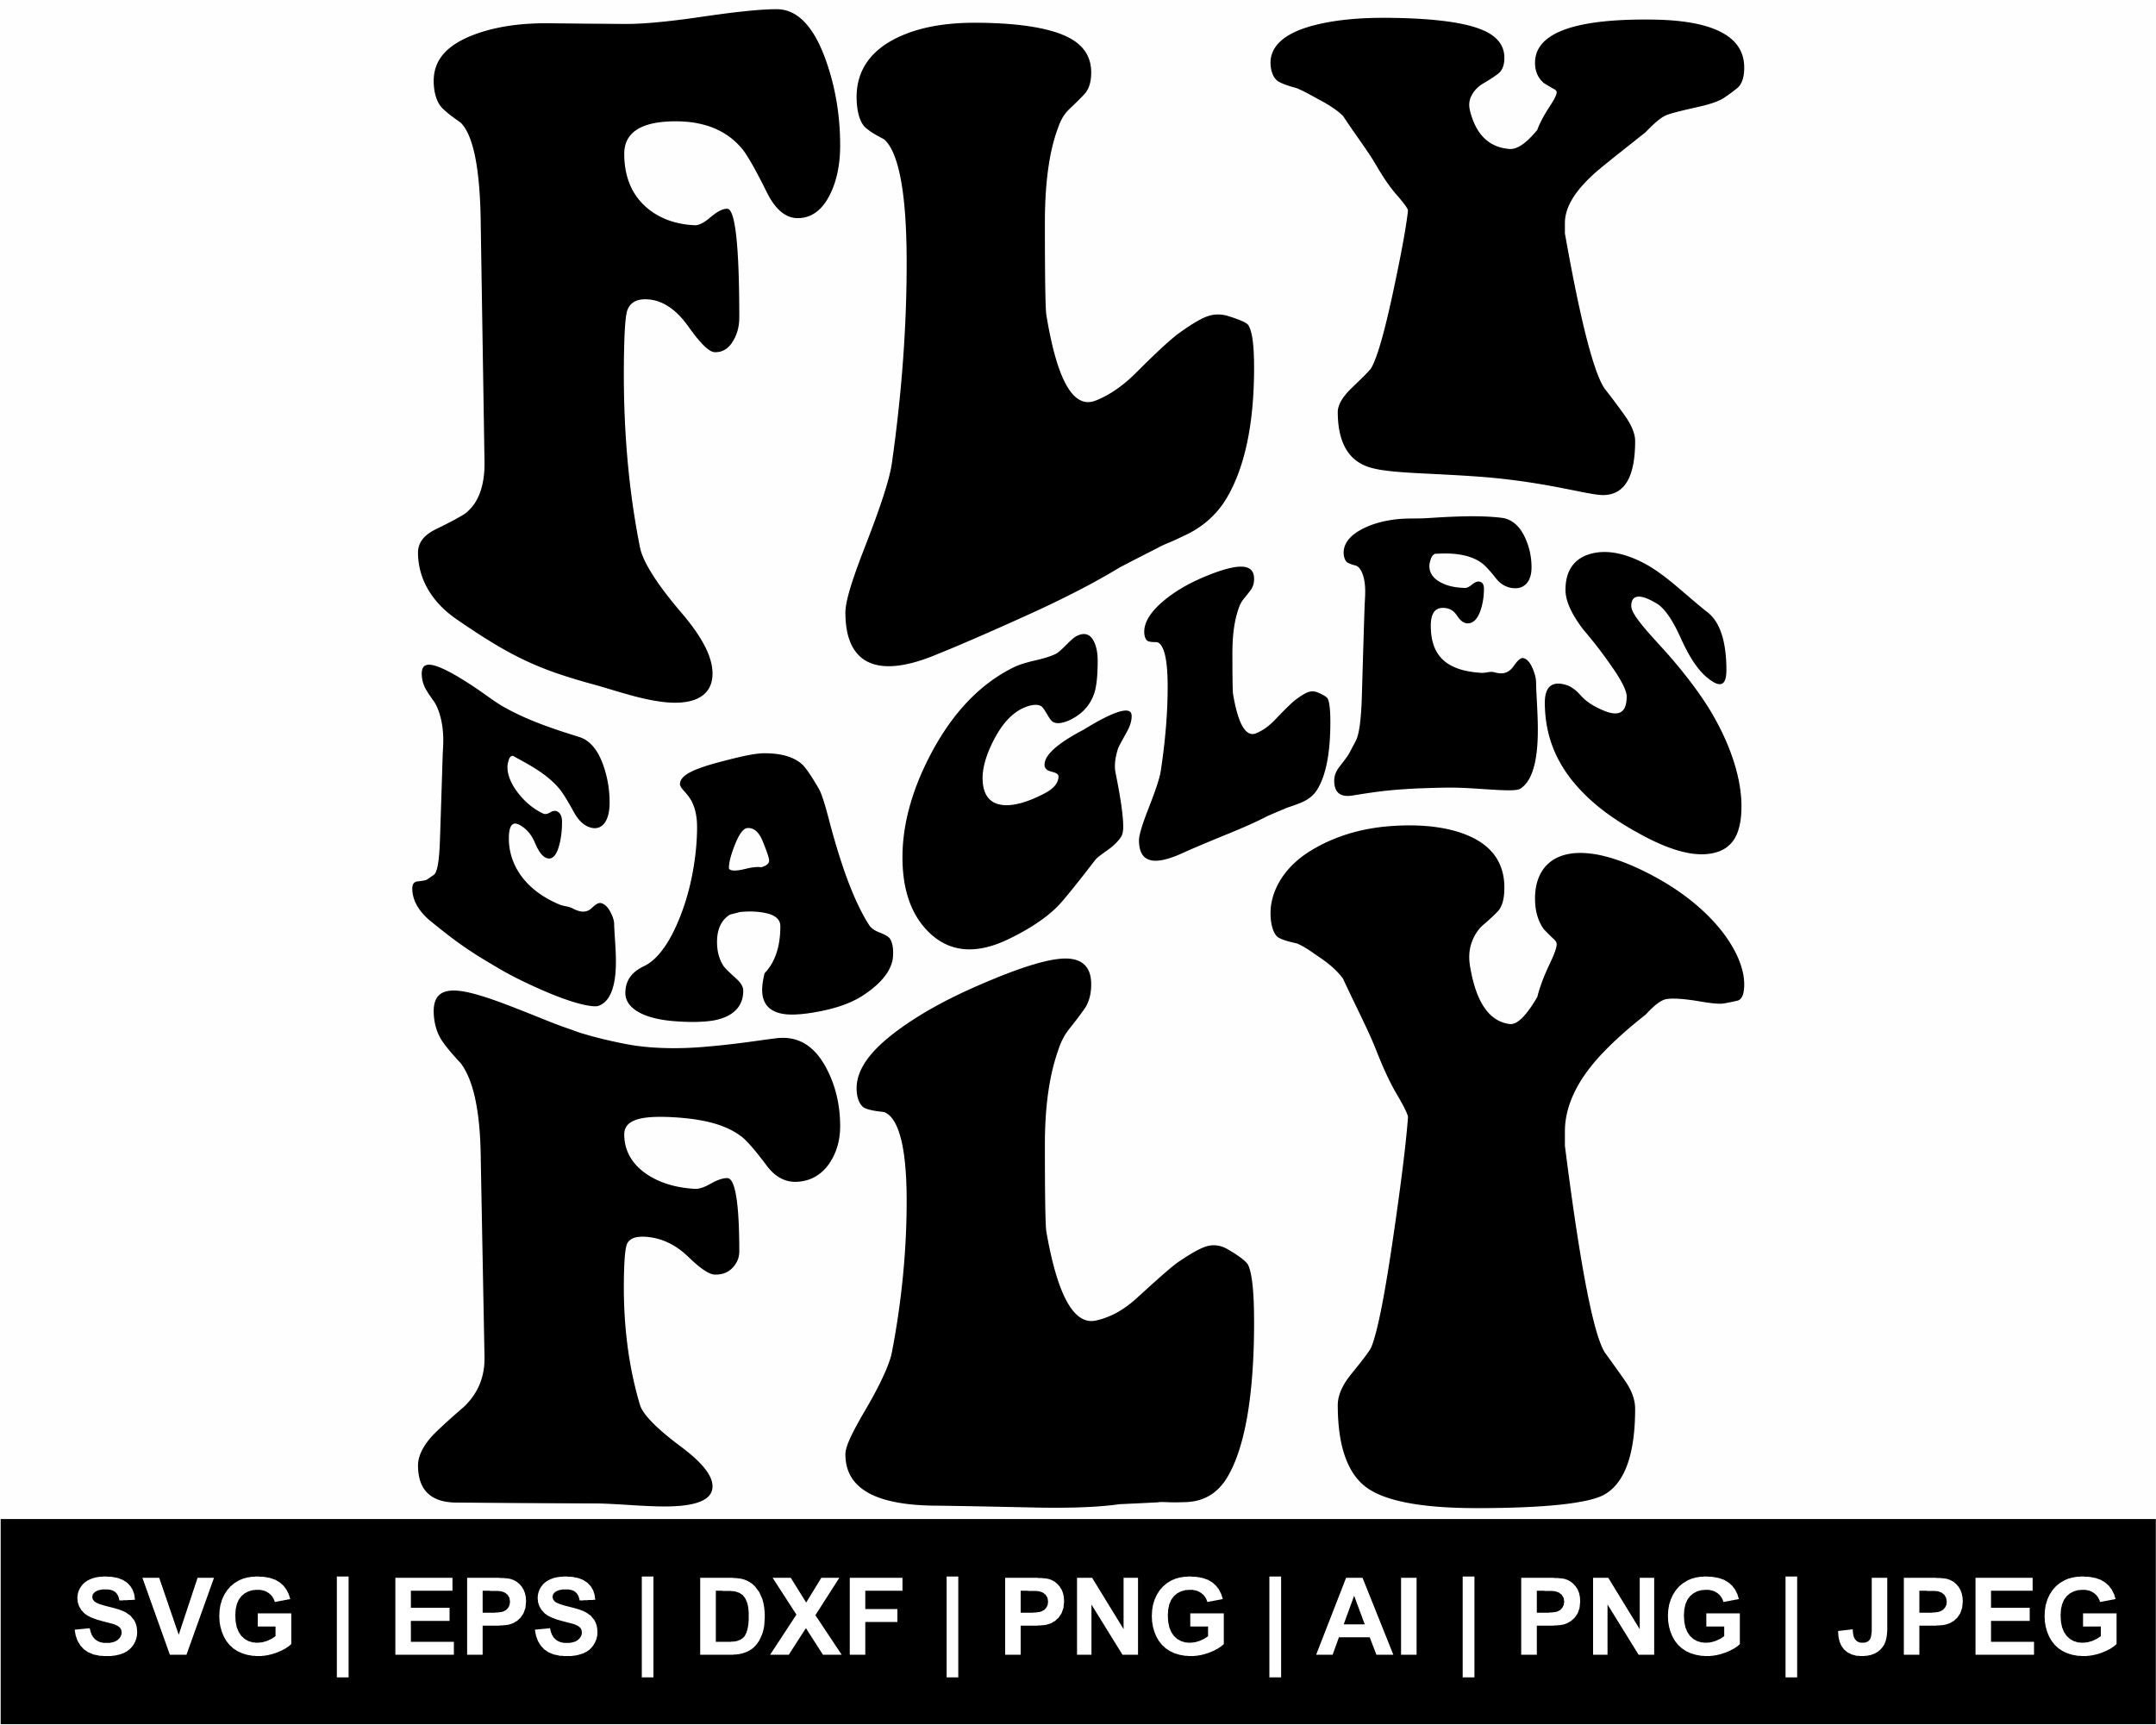 Fly Eagles Fly Wavy Svg, Fly Eagles Fly Svg, Retro Svg, Eagles Mascot Svg,  Team Mascot Svg, T Shirt Svg, Eagles Clipart, Svg Cut File Cricut